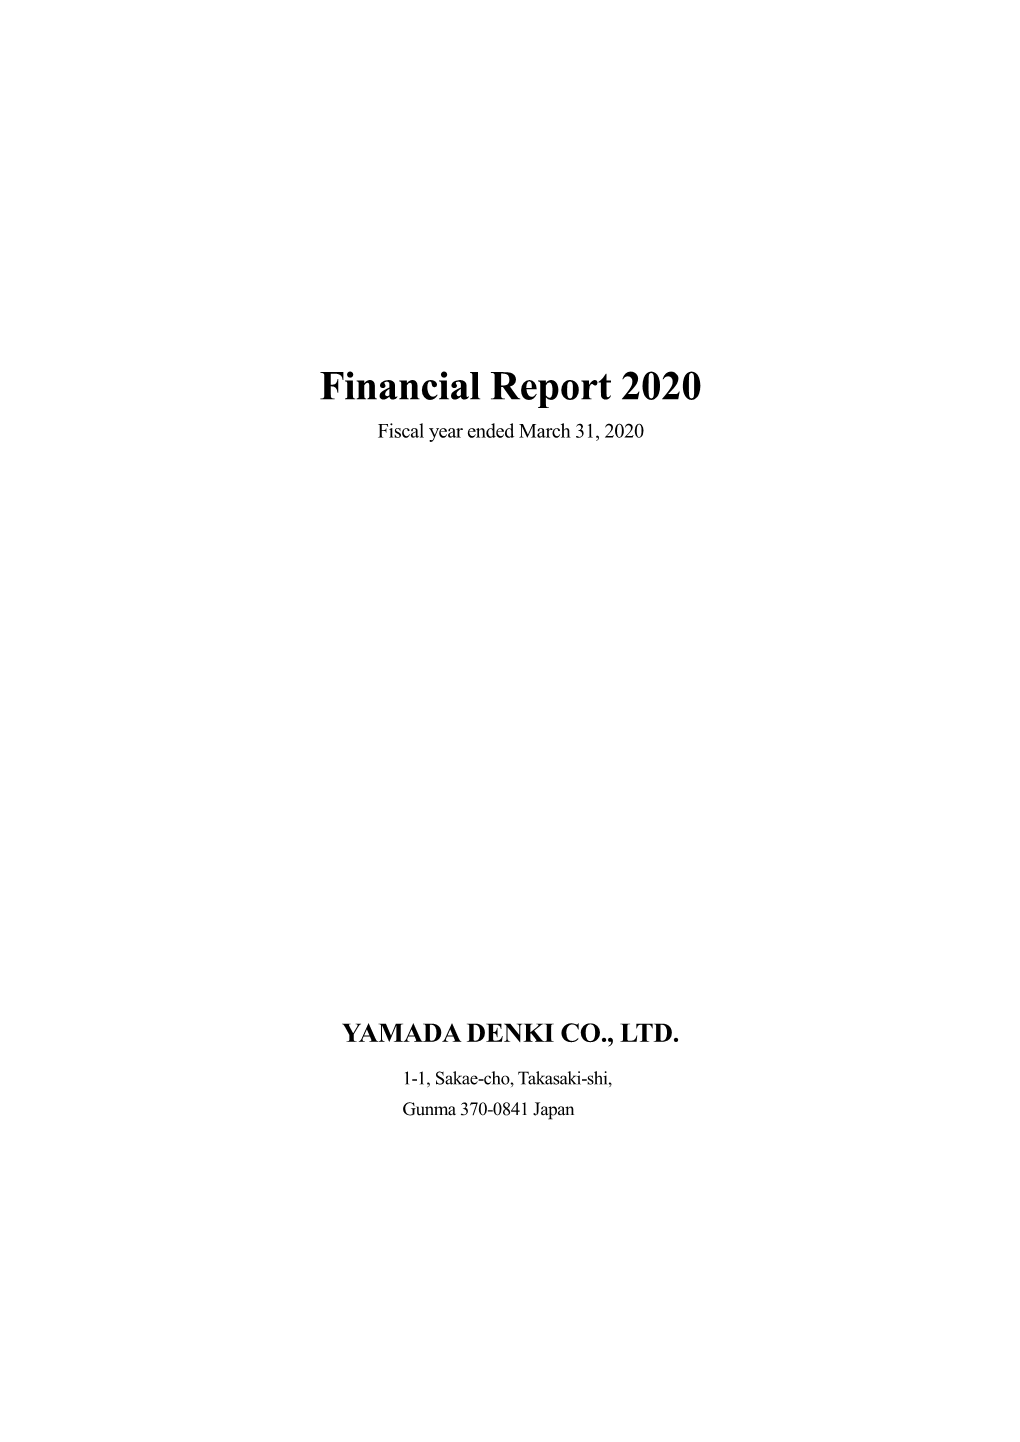 Financial Report 2020 Fiscal Year Ended March 31, 2020